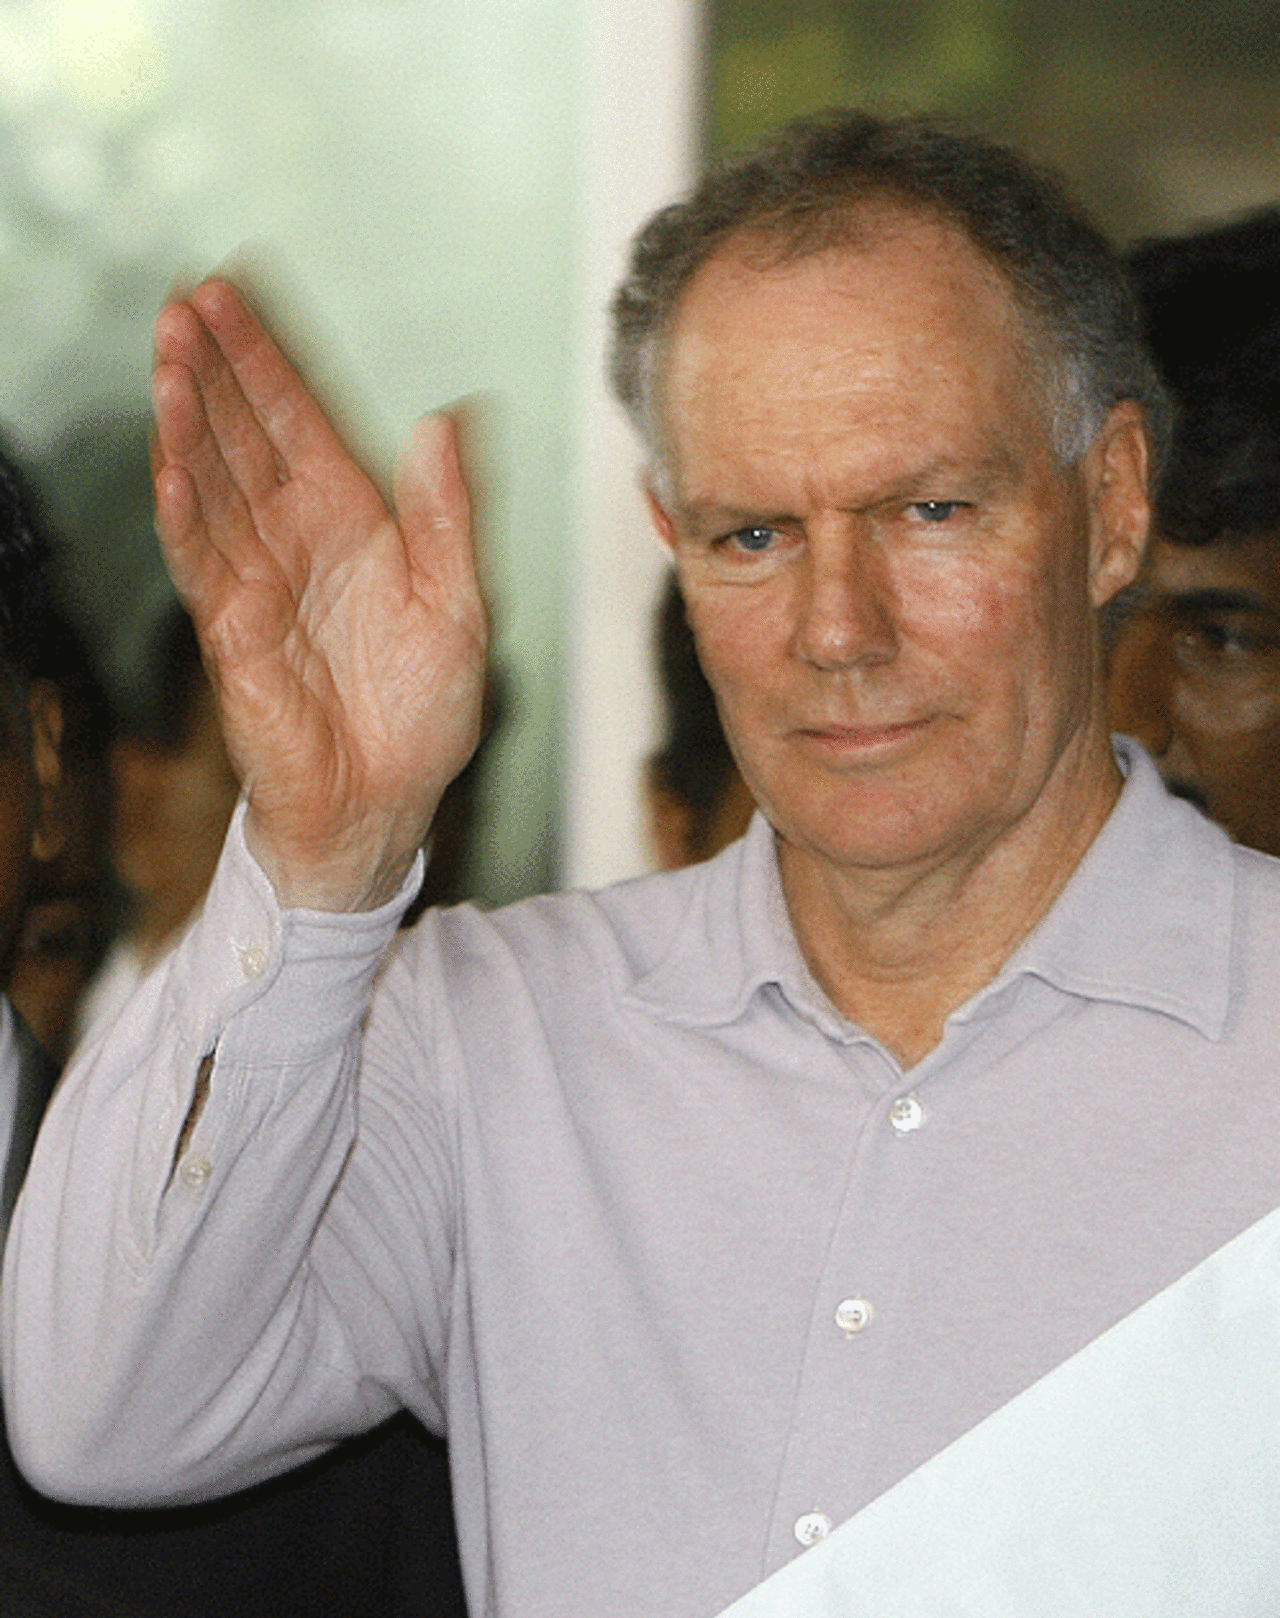 Greg Chappell waves at the waiting media as he leaves the board meeting at the Wankhede Stadium, Mumbai, April 6, 2007